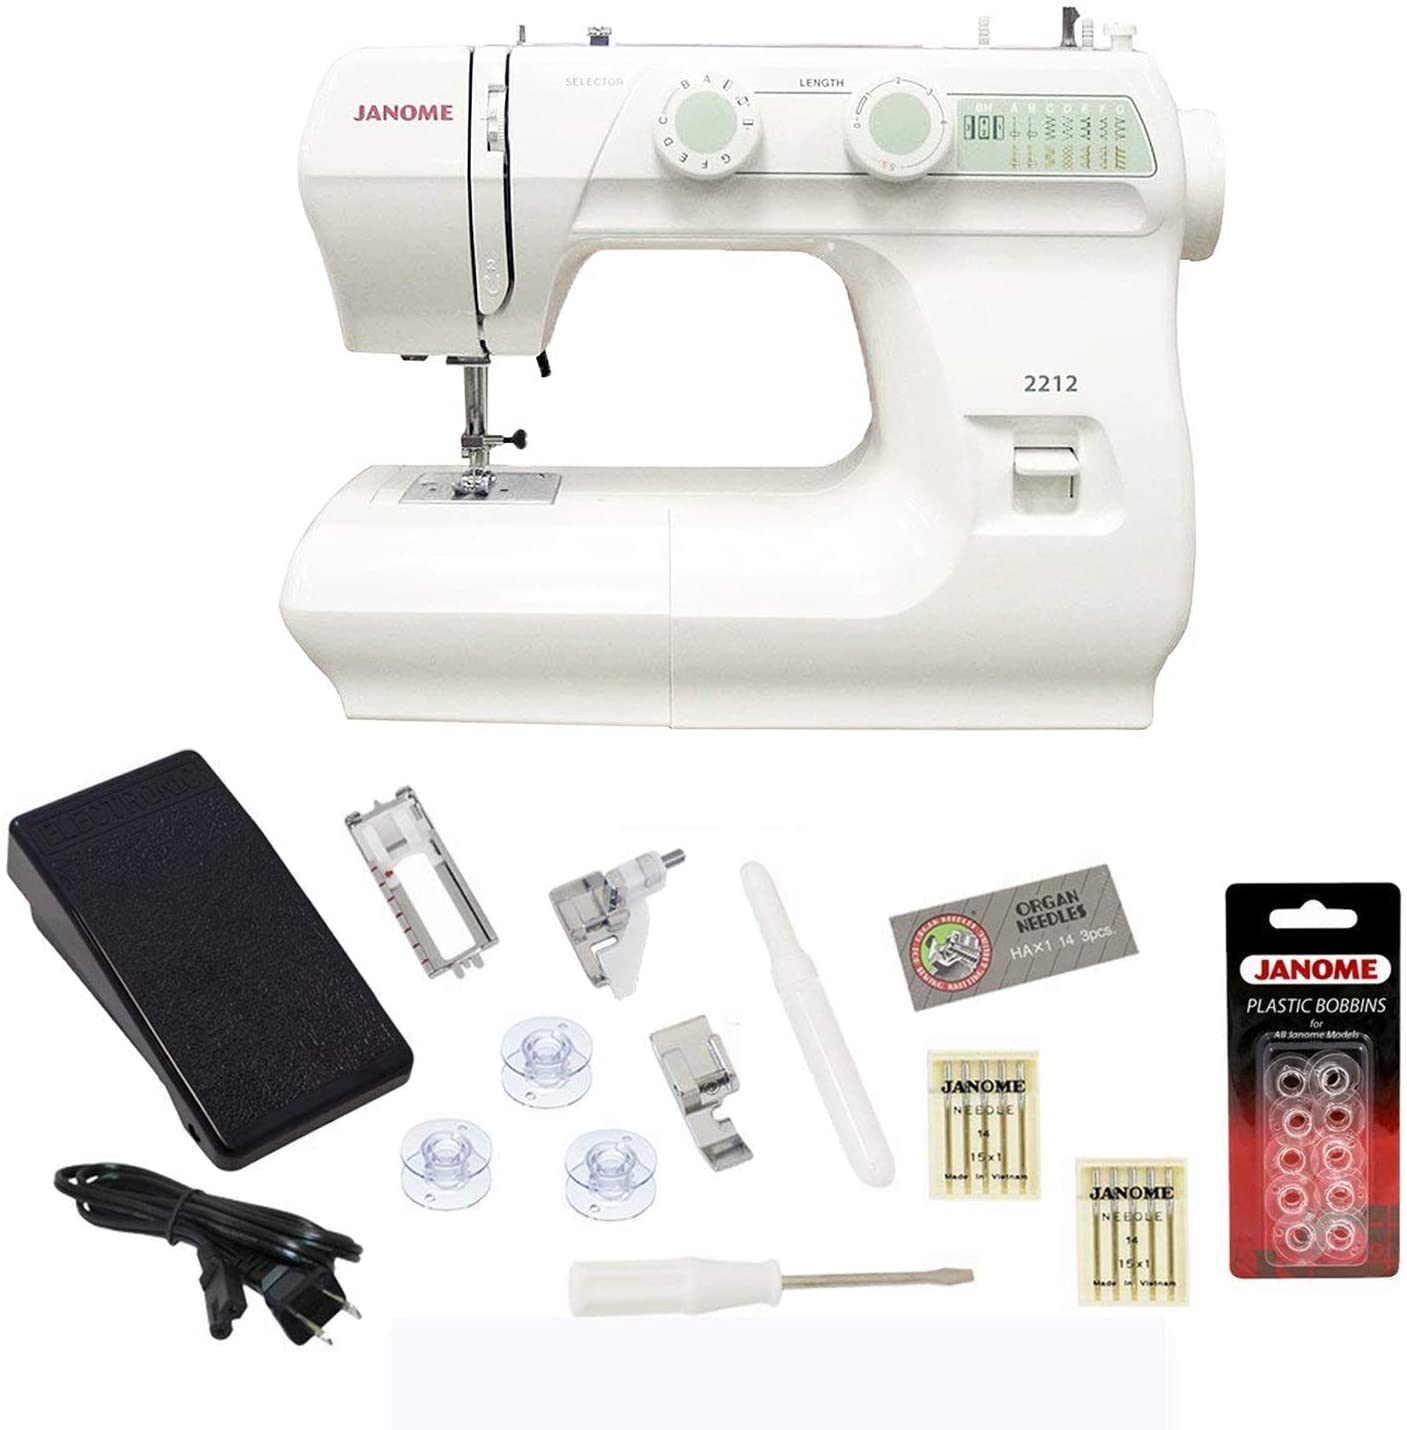 Janome 2212 Sewing Machine - Best Janome Sewing Machine for Quilting